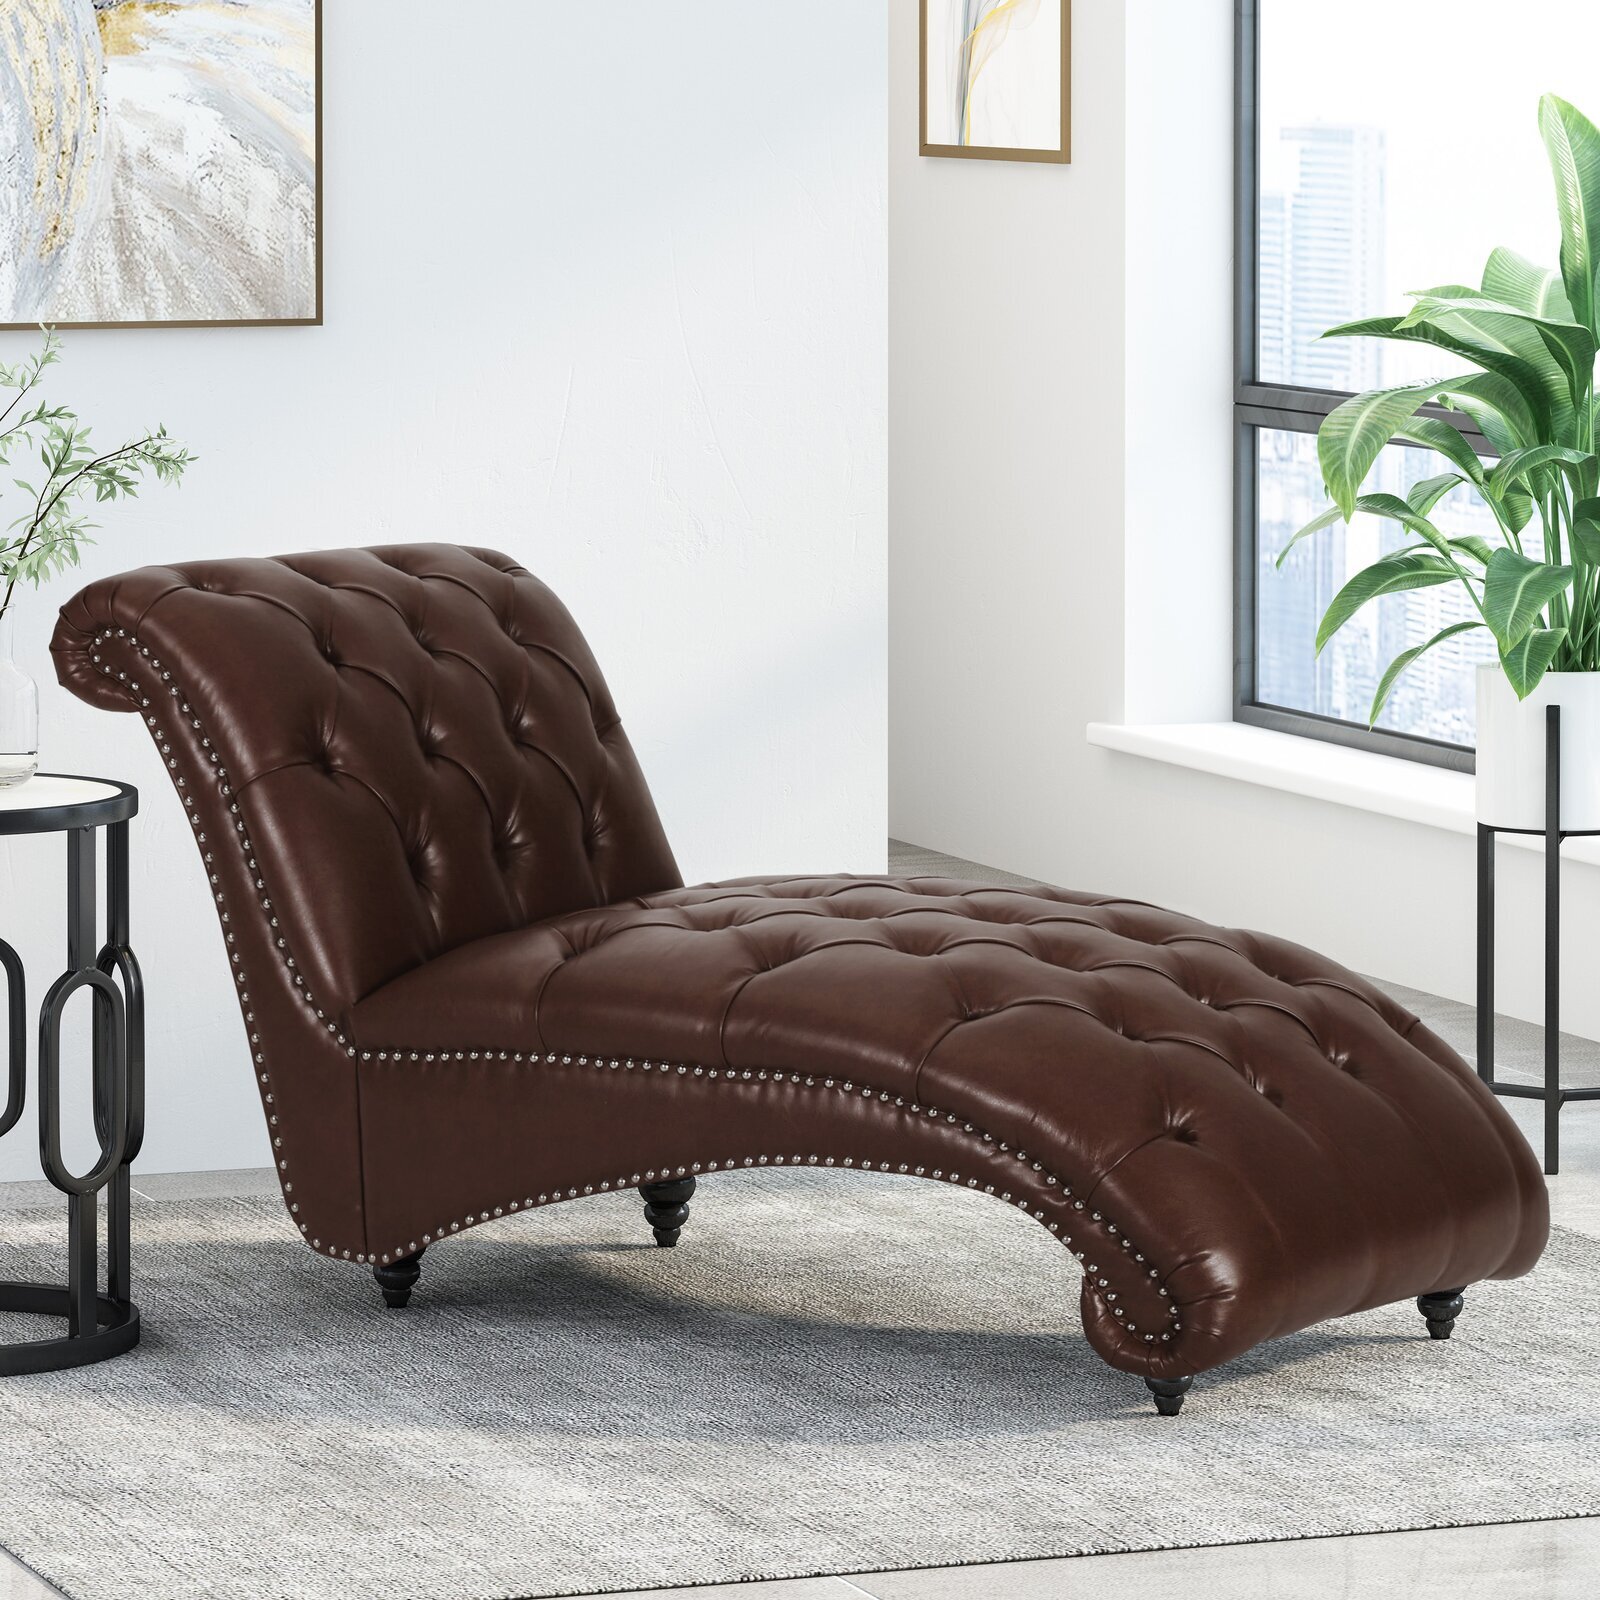 Antique style genuine leather chaise lounge